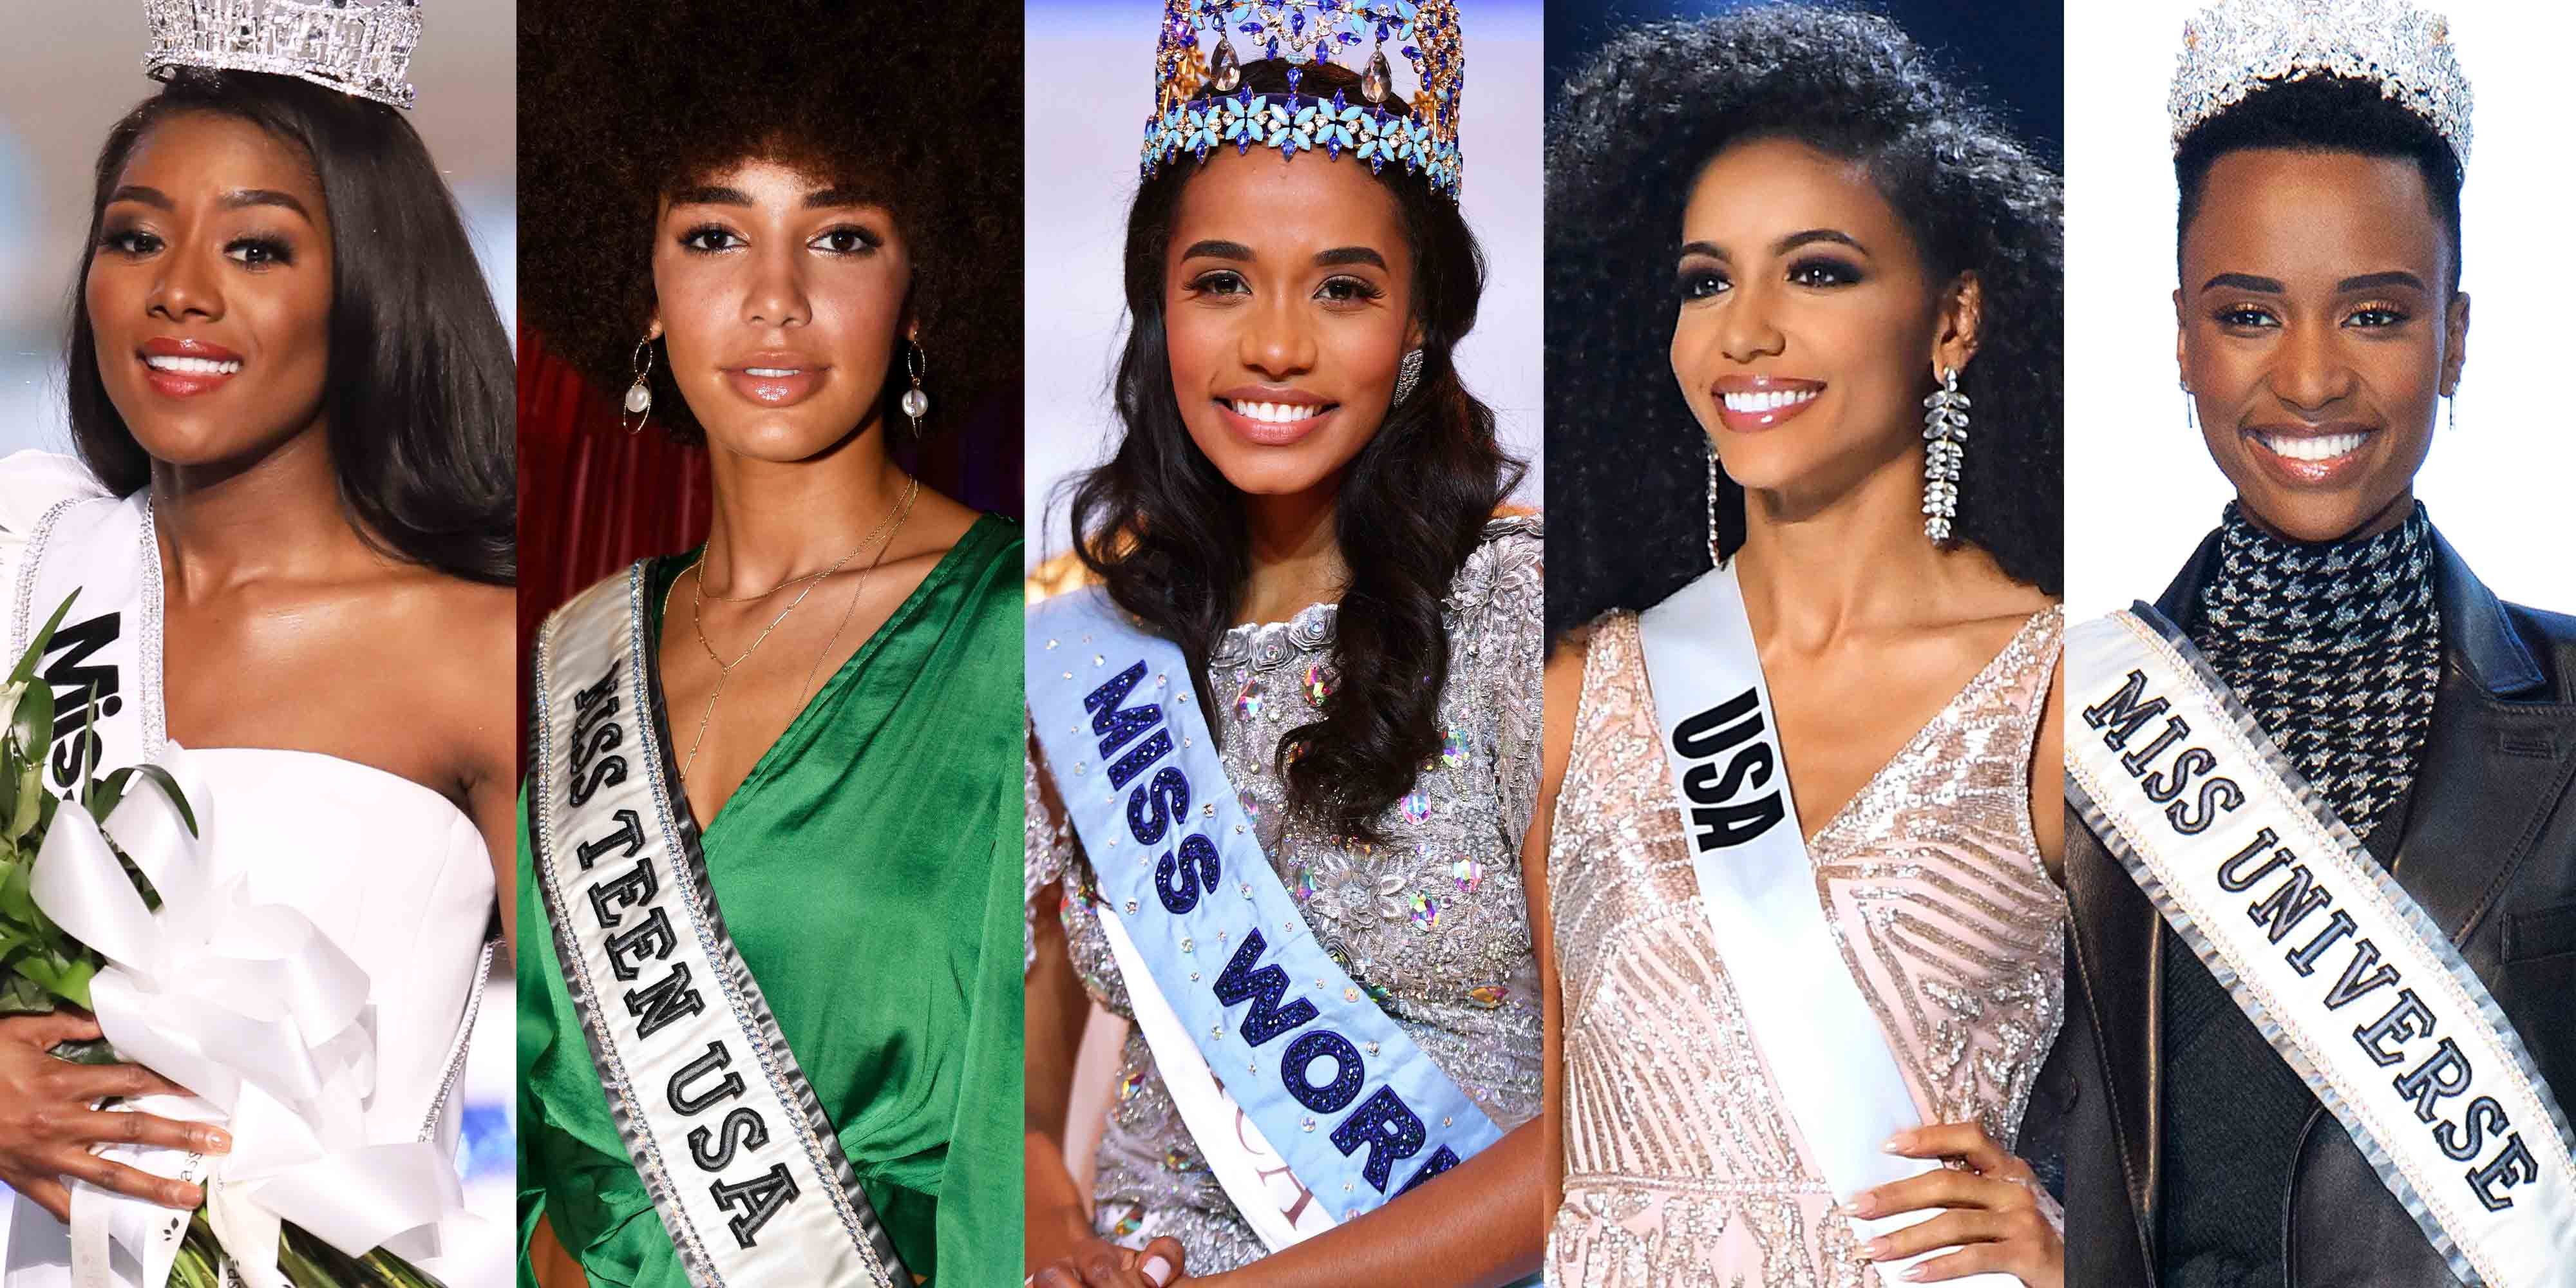 For the First Time Ever, Five Black Women Hold Crowns in the Five